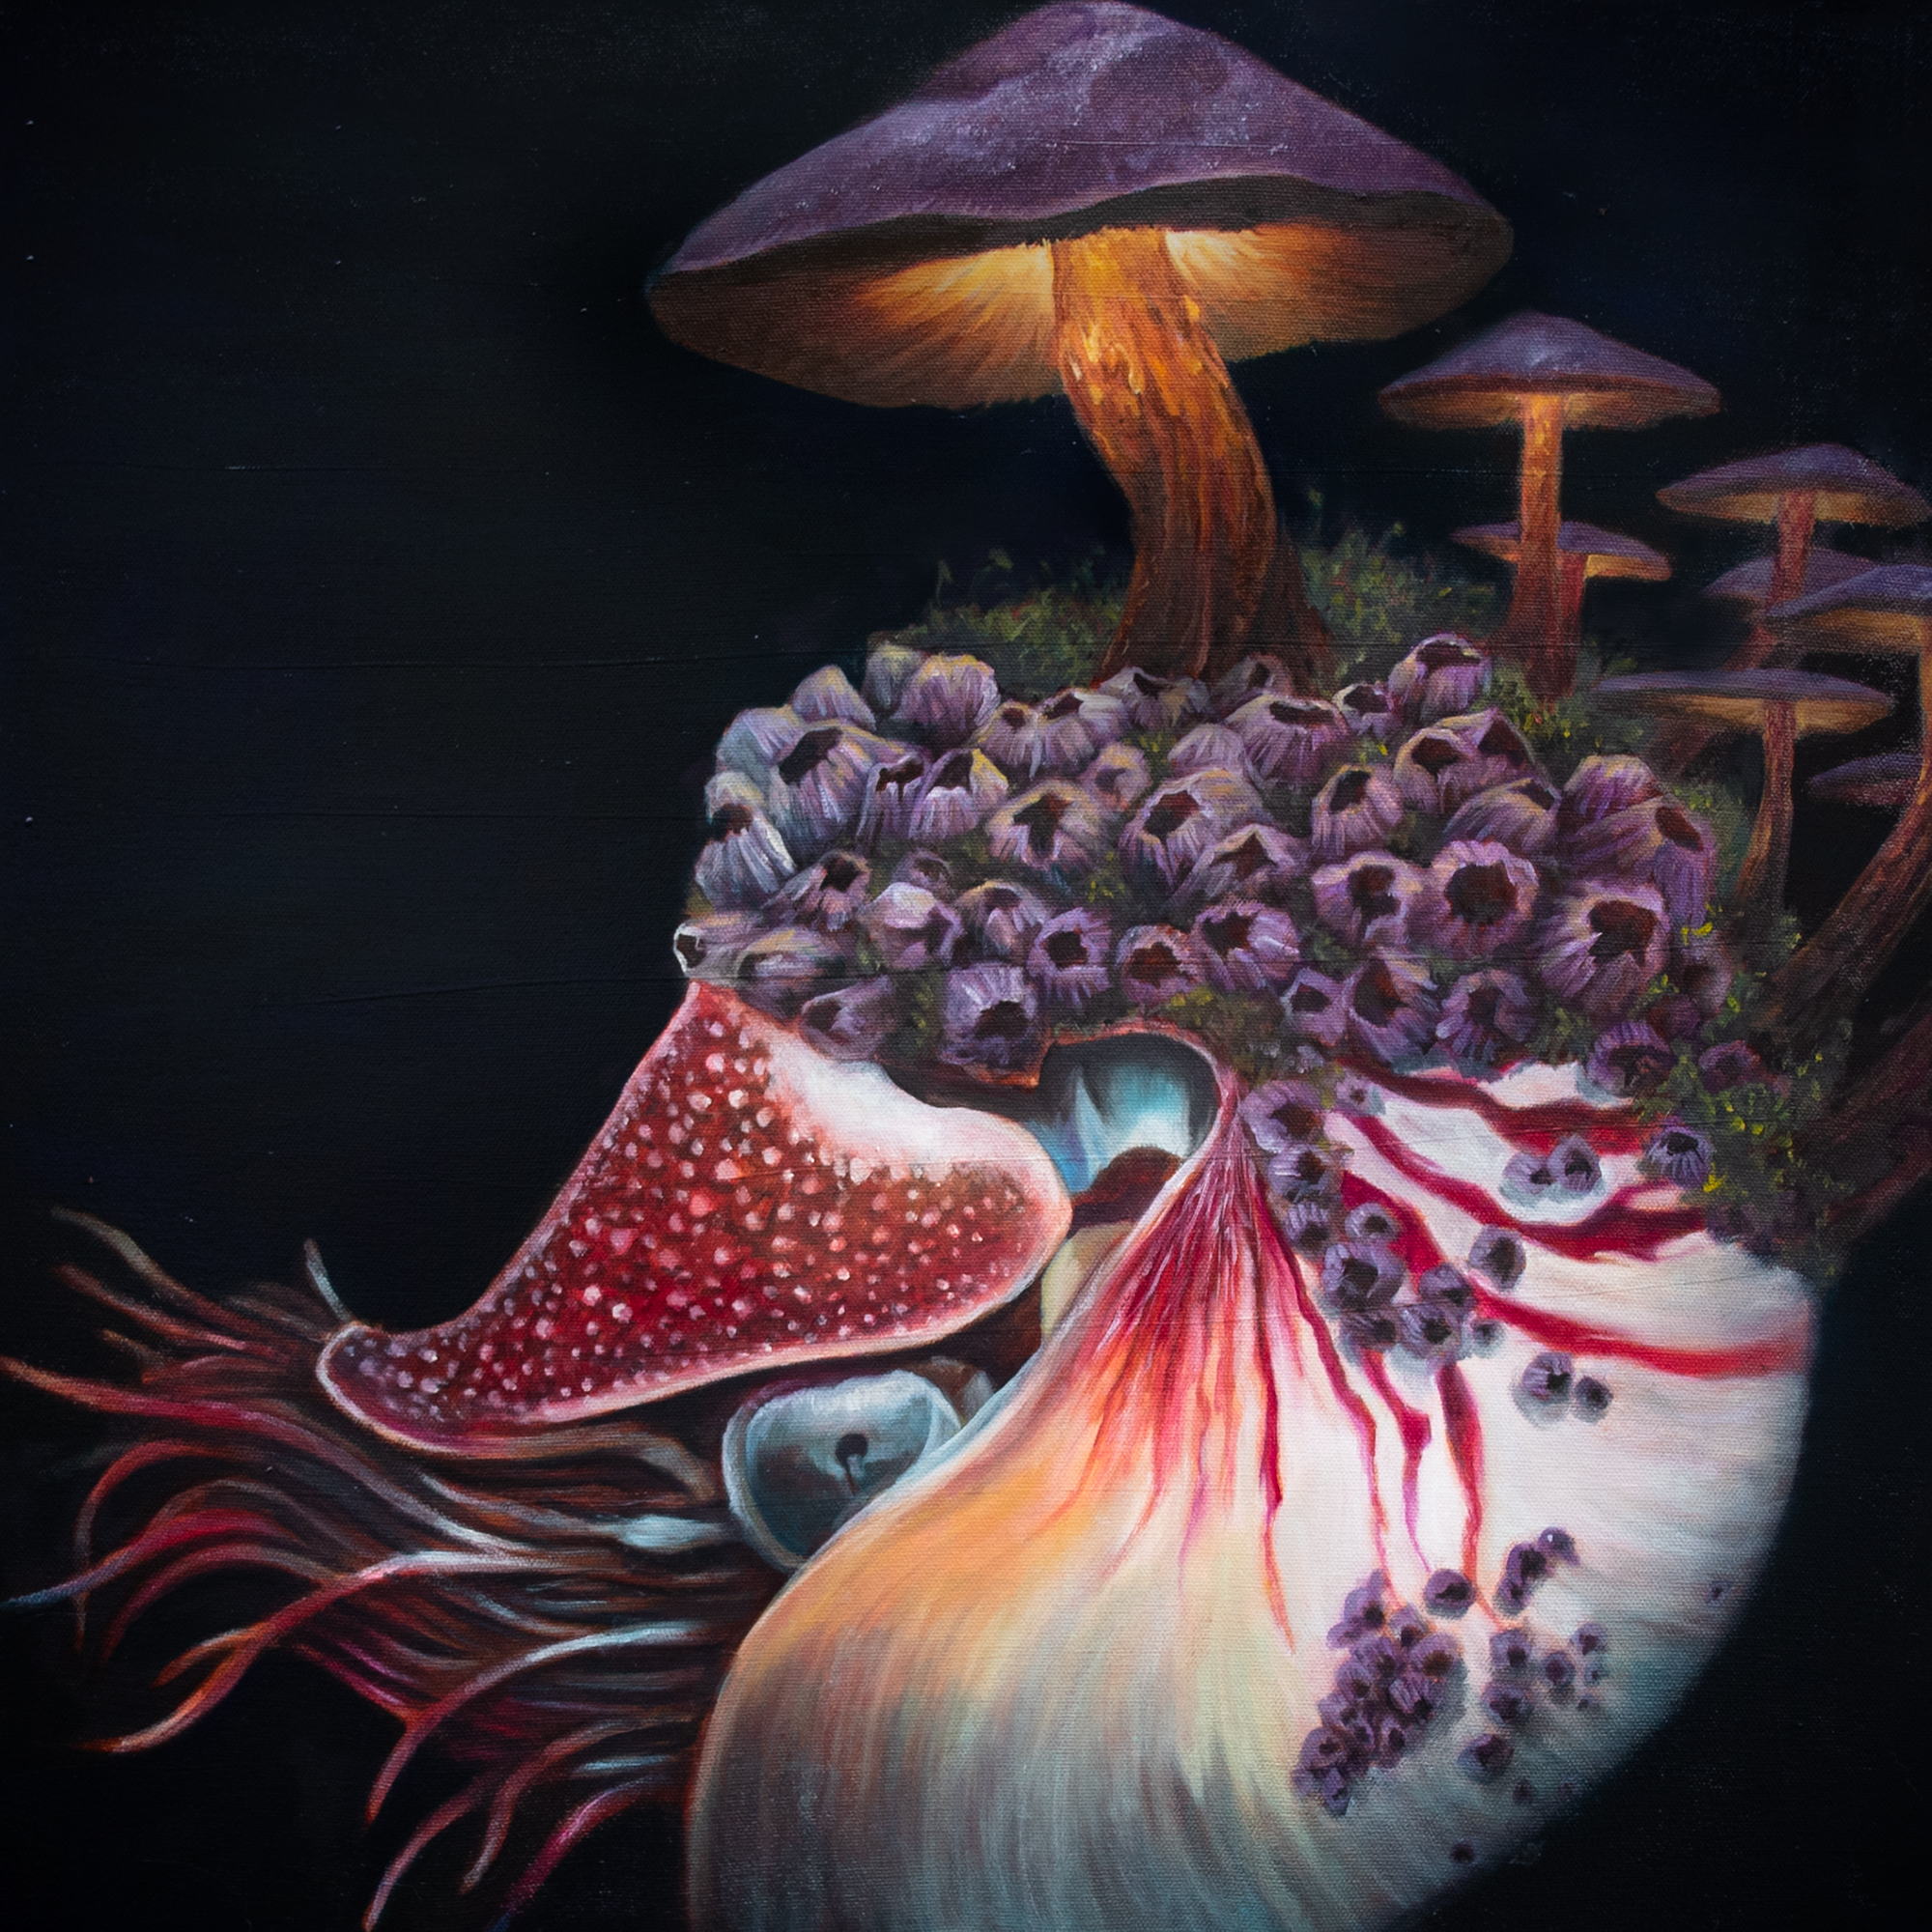 Nautilus covered in barnacles, mushrooms and moss. The mushrooms have light emanating from the caps illuminating the barnacles and nautilus shell. The creature appears on top of a dark background 